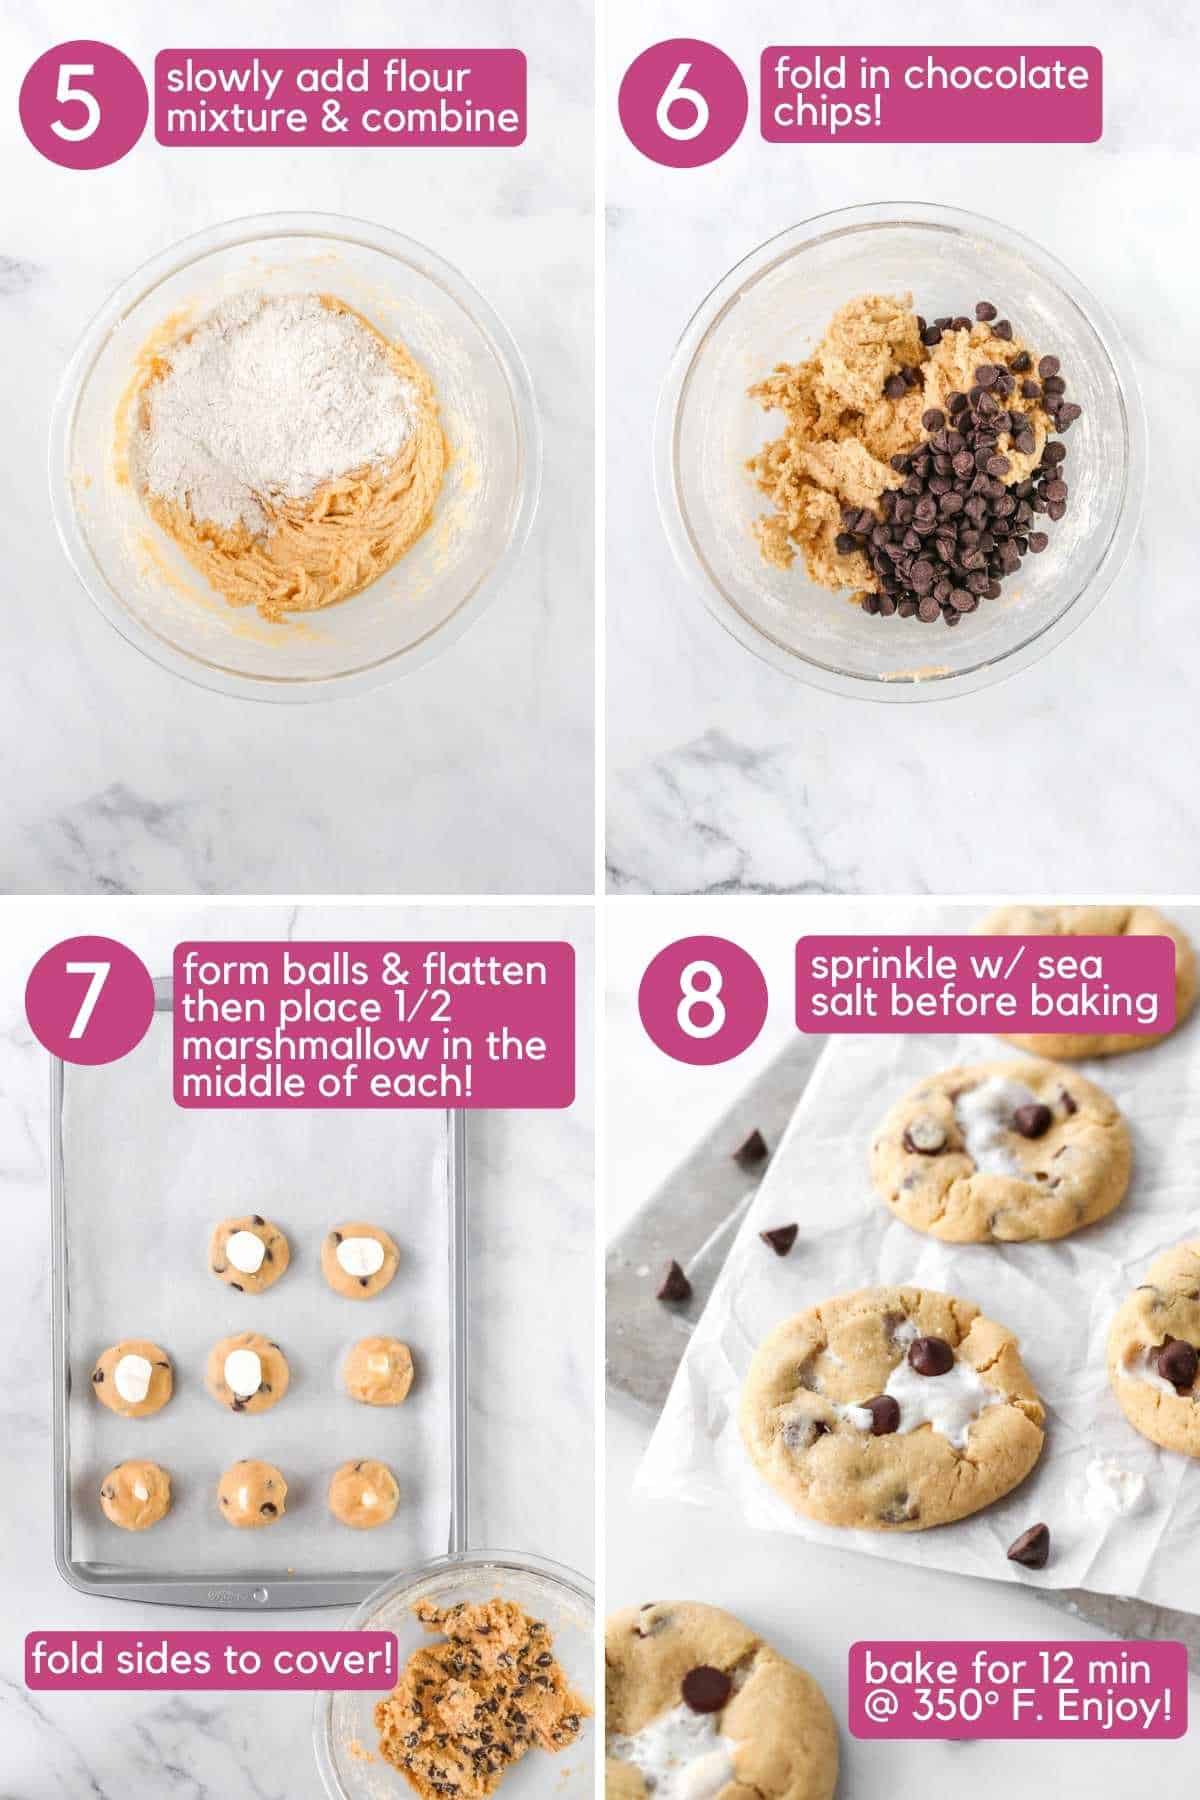 Add chocolate chips and marshmallows then bake for Chocolate Chip Marshmallow Cookie.